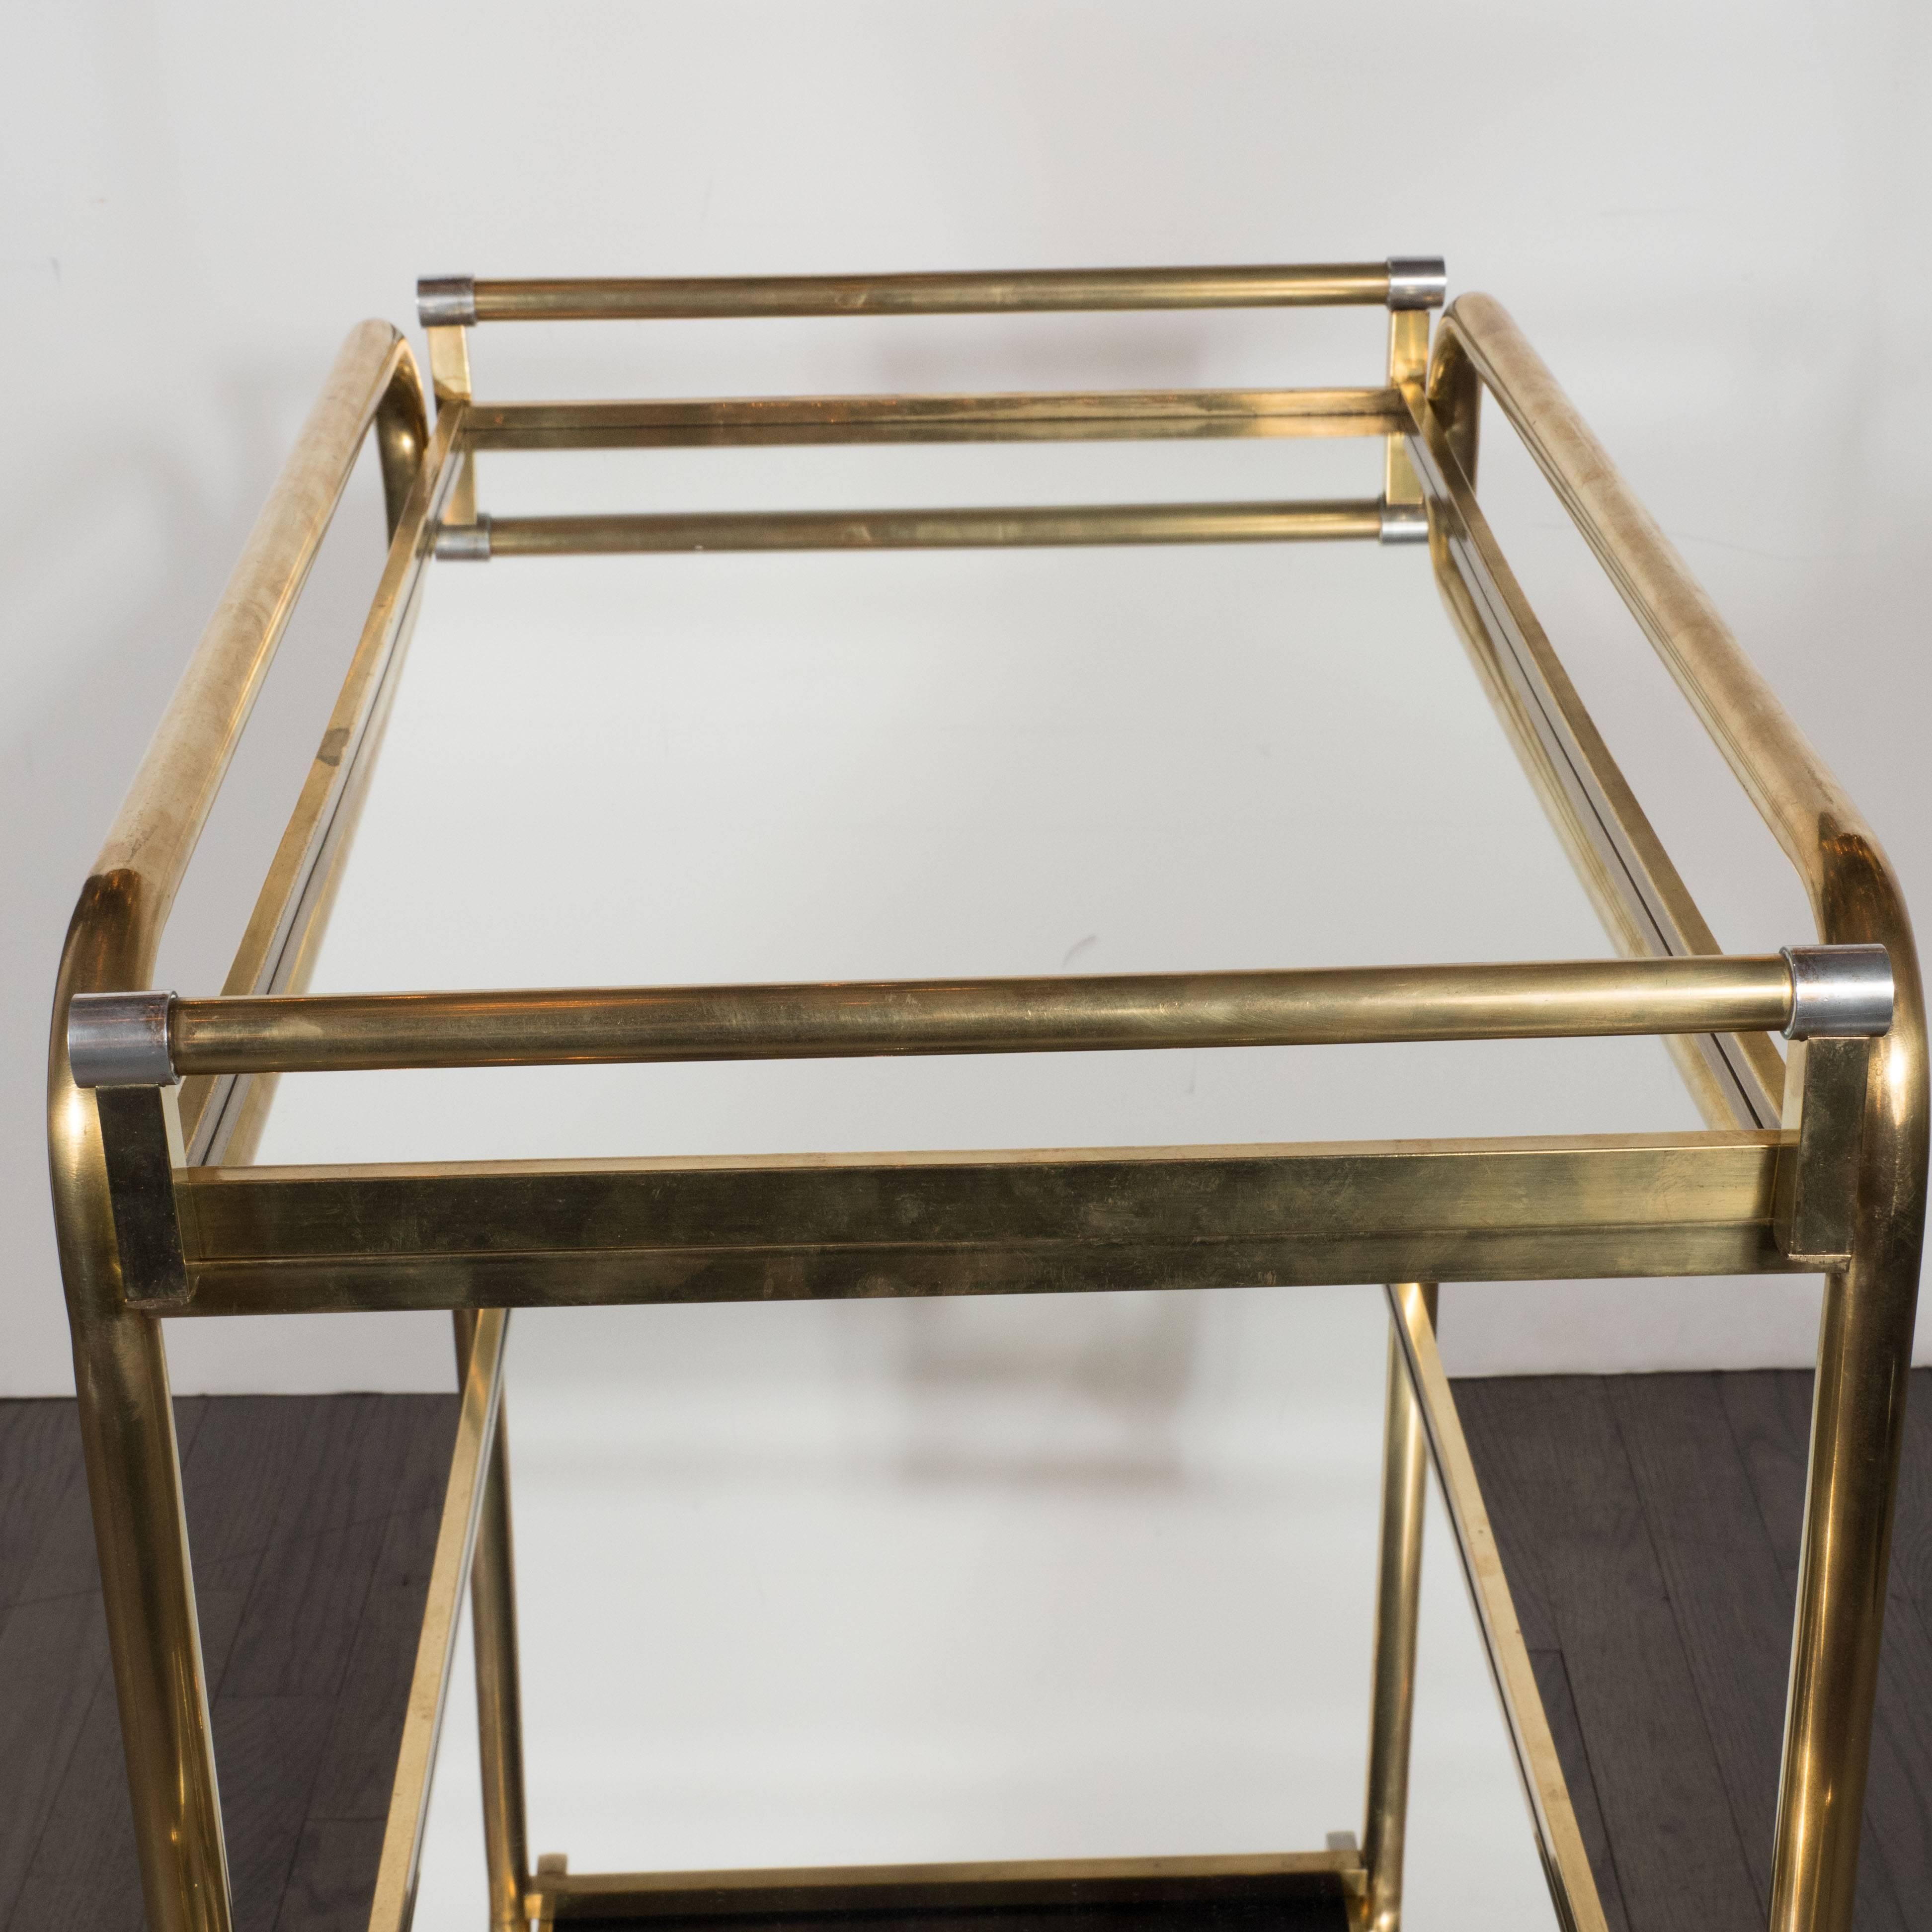 Italian Mid-Century Modern Brass and Mirrored Glass Bar Cart with Casters 2